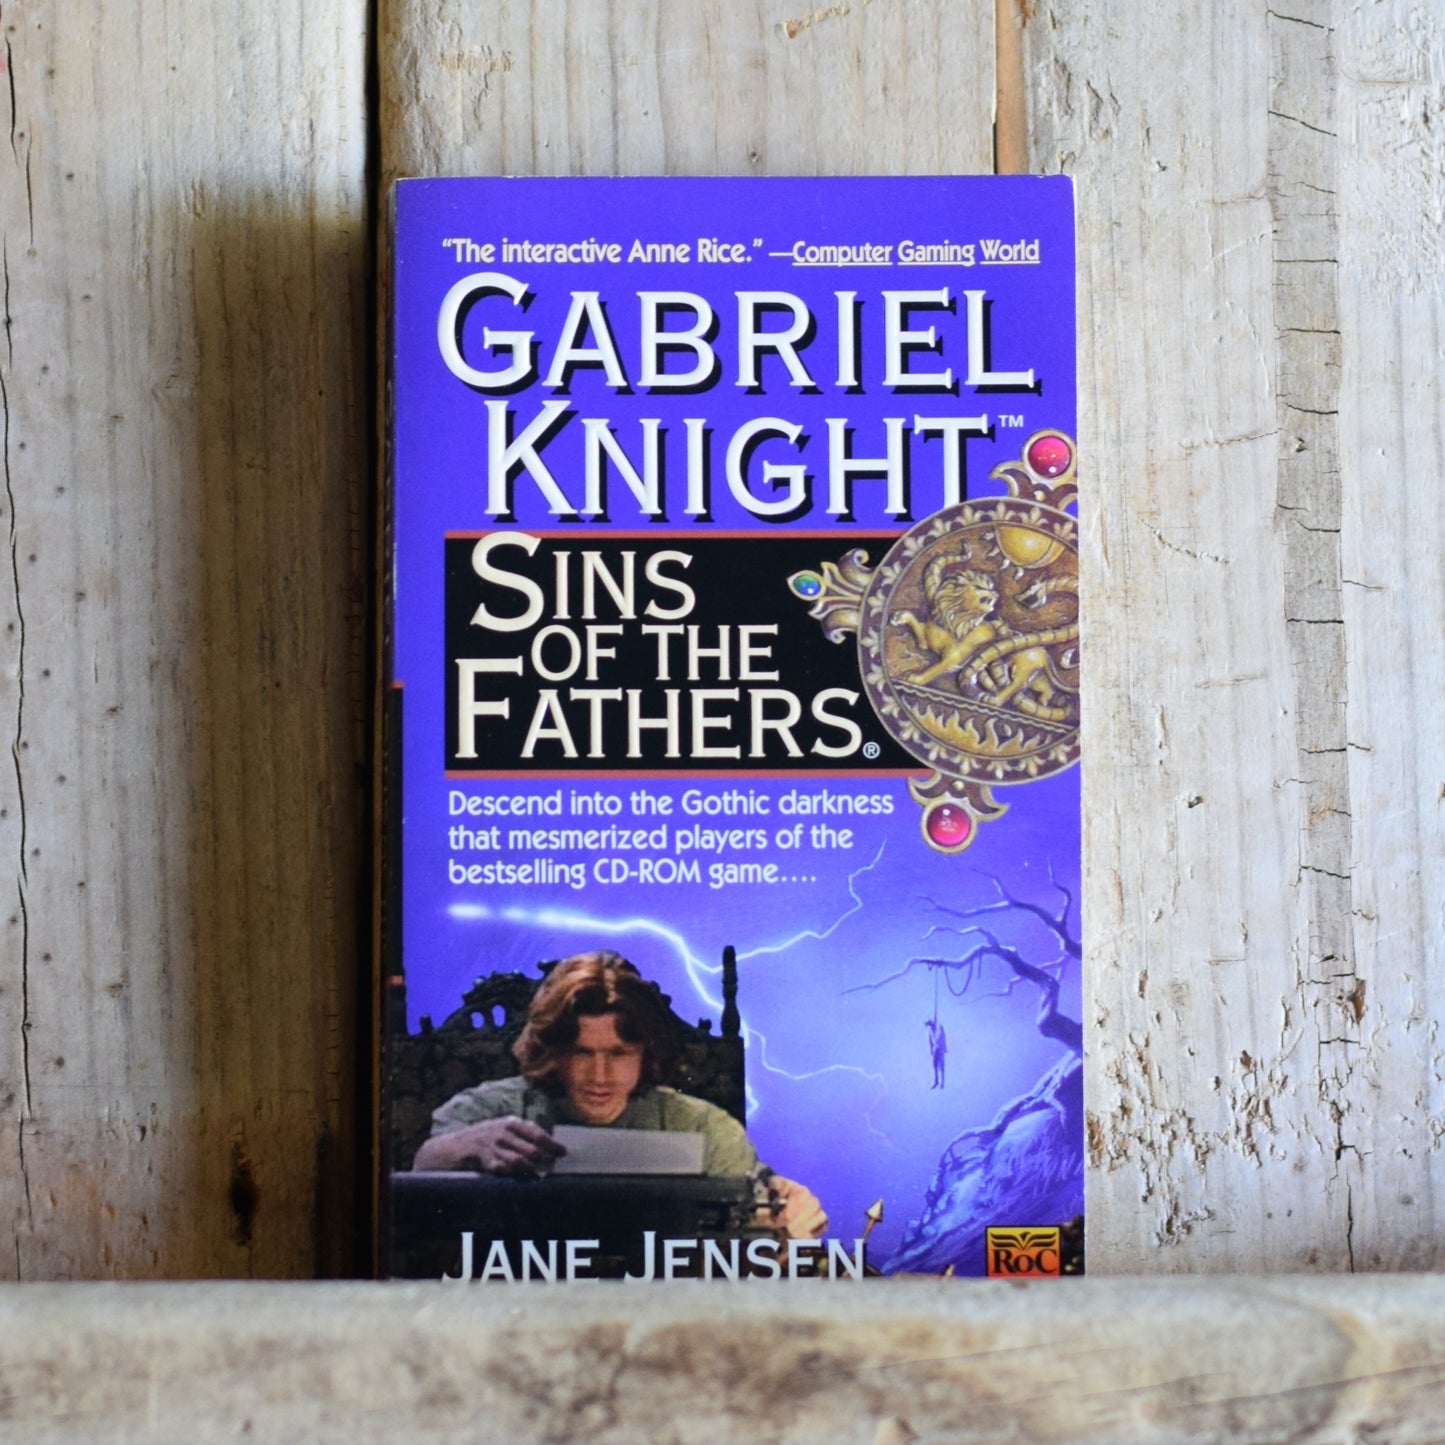 Vintage Horror Paperback: Jane Jensen - Gabriel Knight, Sins of the Father FIRST EDITION/PRINTING